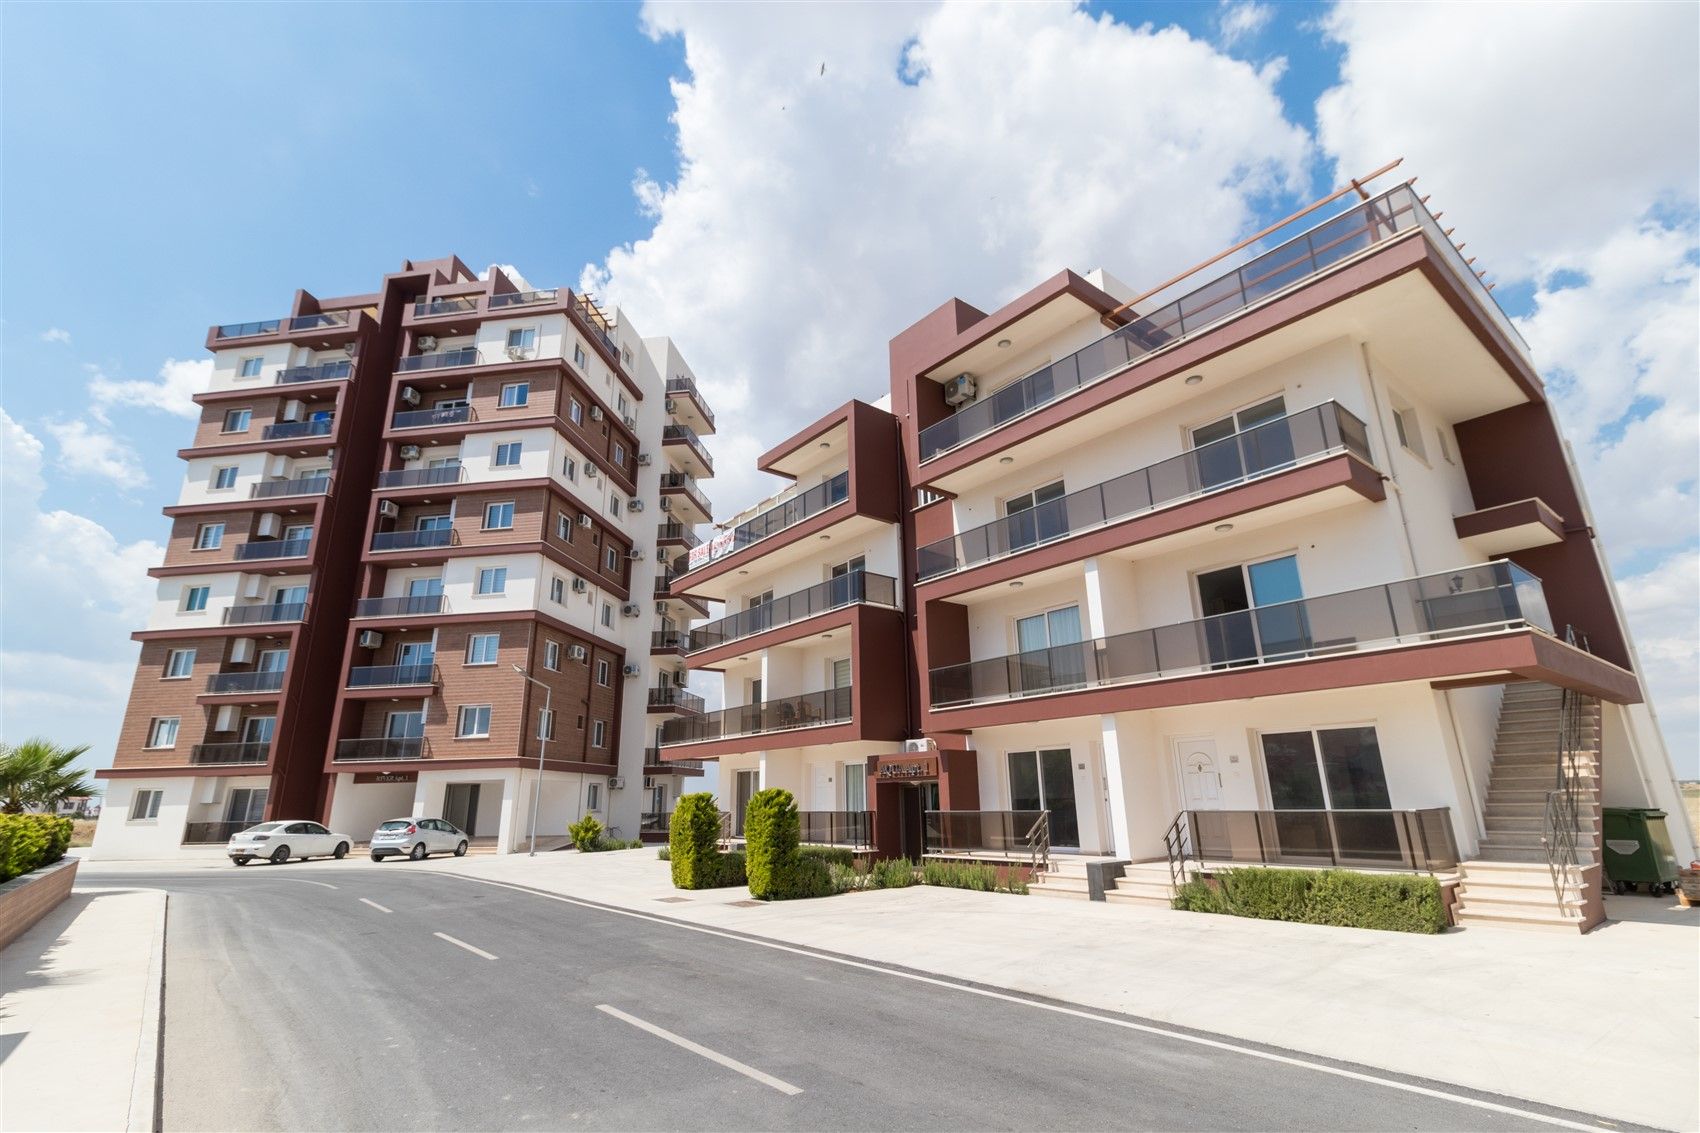 Studio apartments in the largest project on the coast of North Cyprus